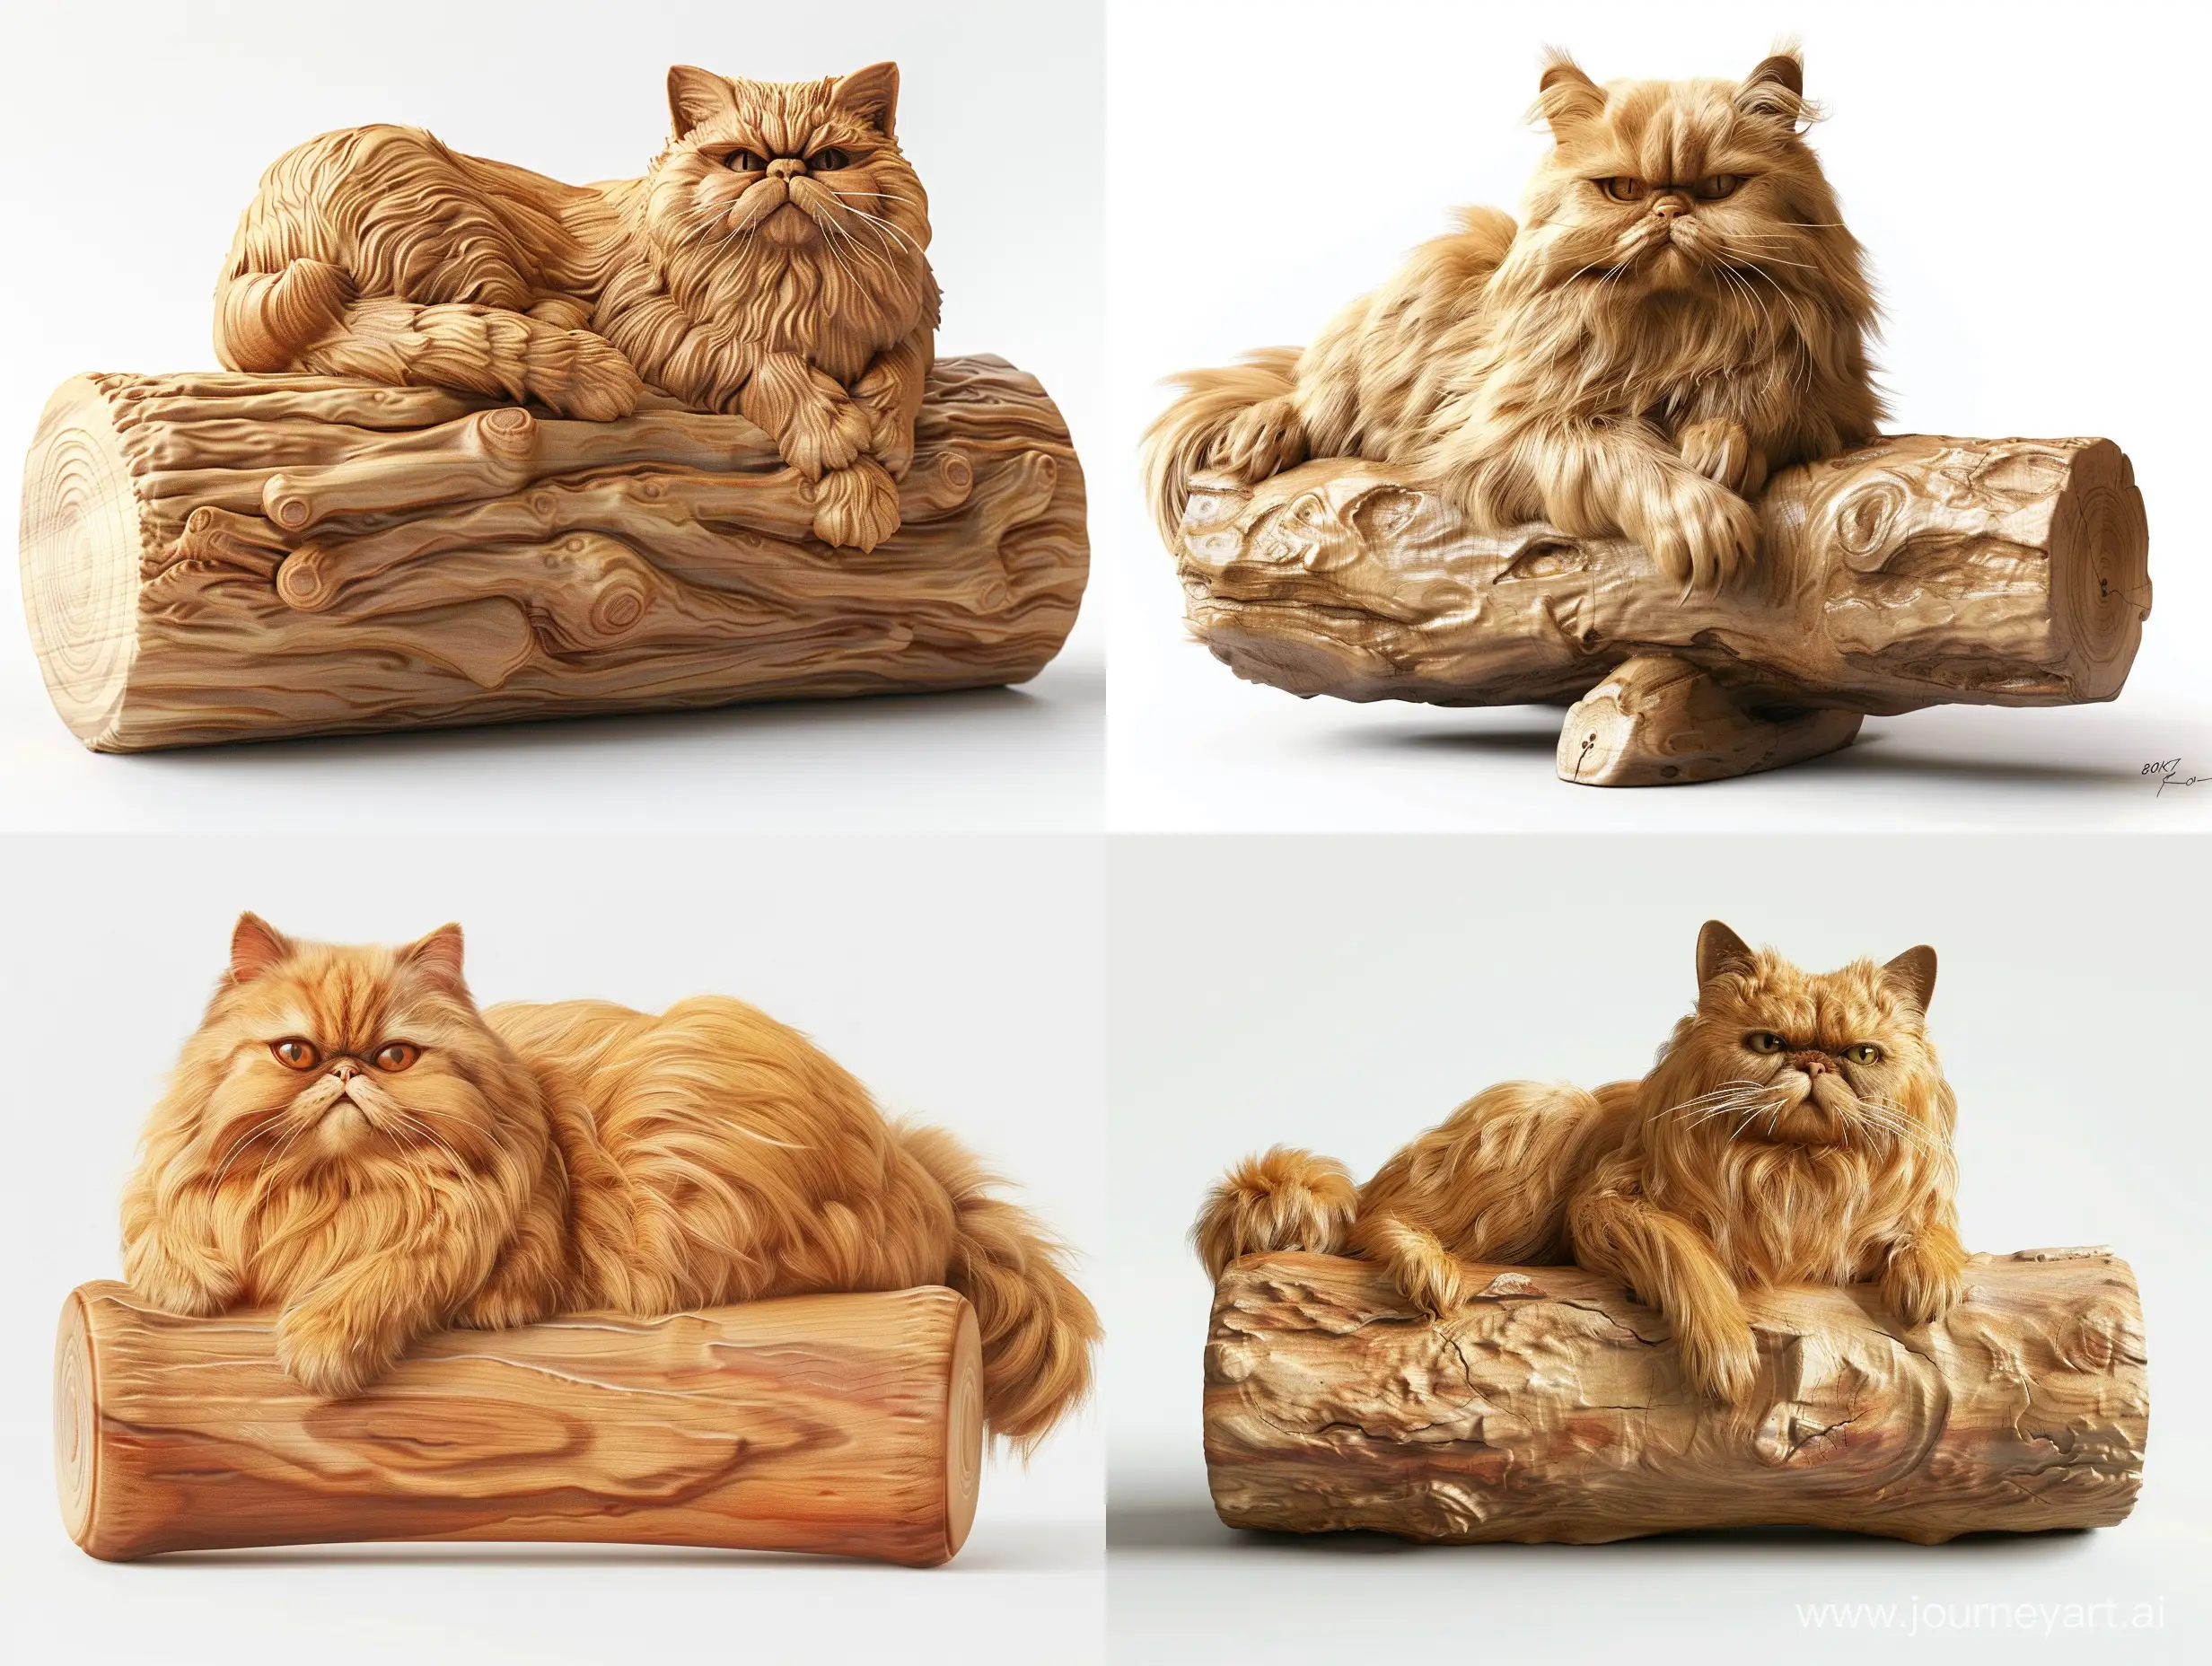 Ultra-Realistic-Wooden-Sculpture-of-Persian-Cat-Resting-on-Cylinder